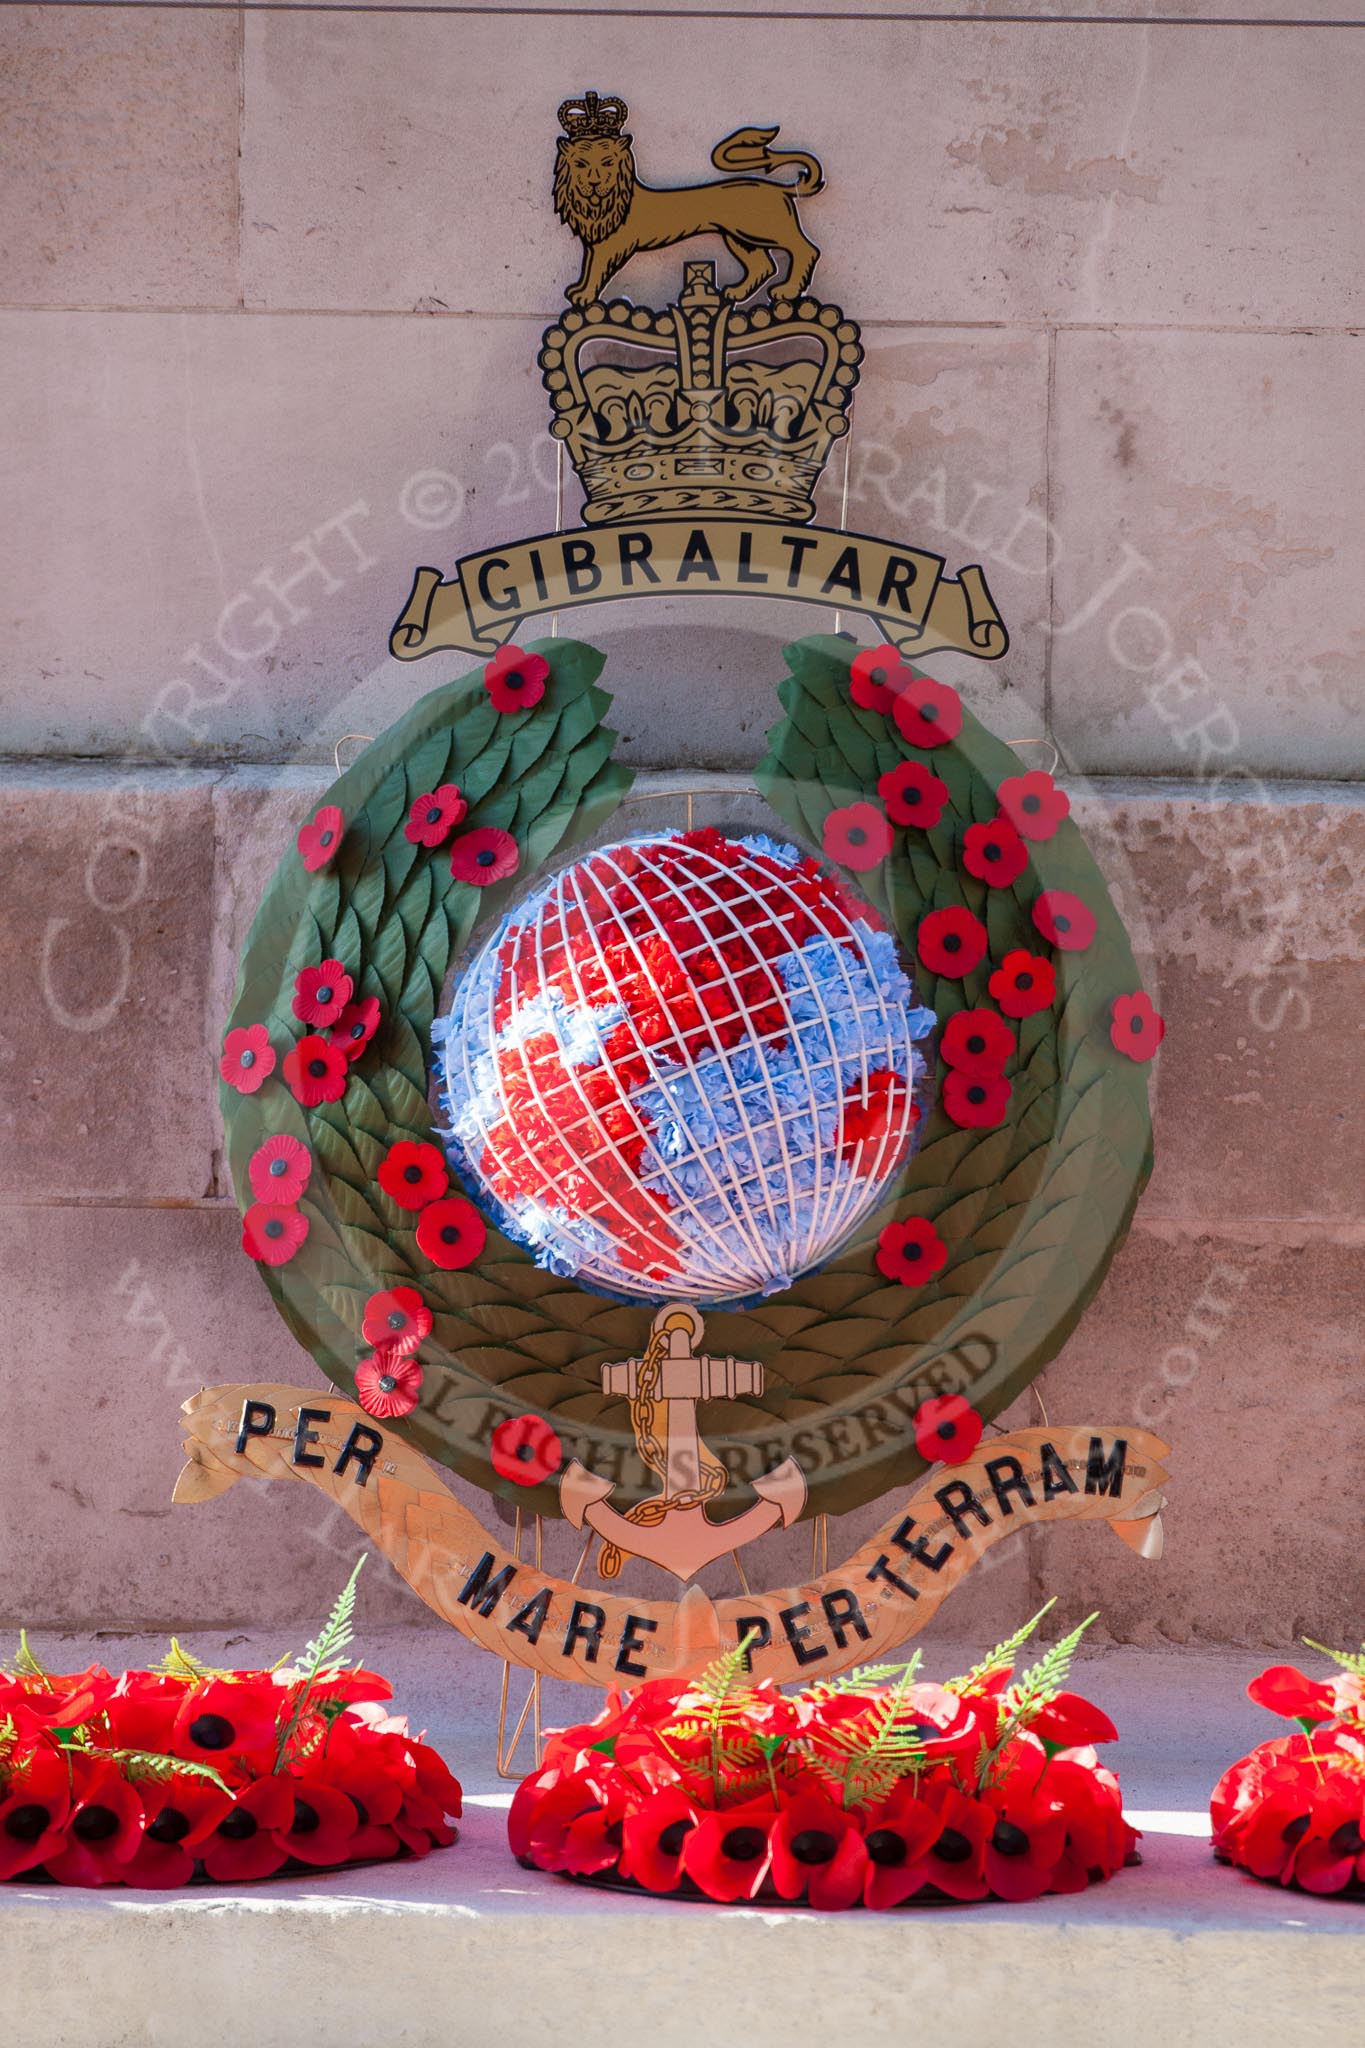 Remembrance Sunday 2012 Cenotaph March Past: "Gibraltar - per mare per terram". Wreath on the southern side of the Cenotaph..
Whitehall, Cenotaph,
London SW1,

United Kingdom,
on 11 November 2012 at 12:18, image #1781